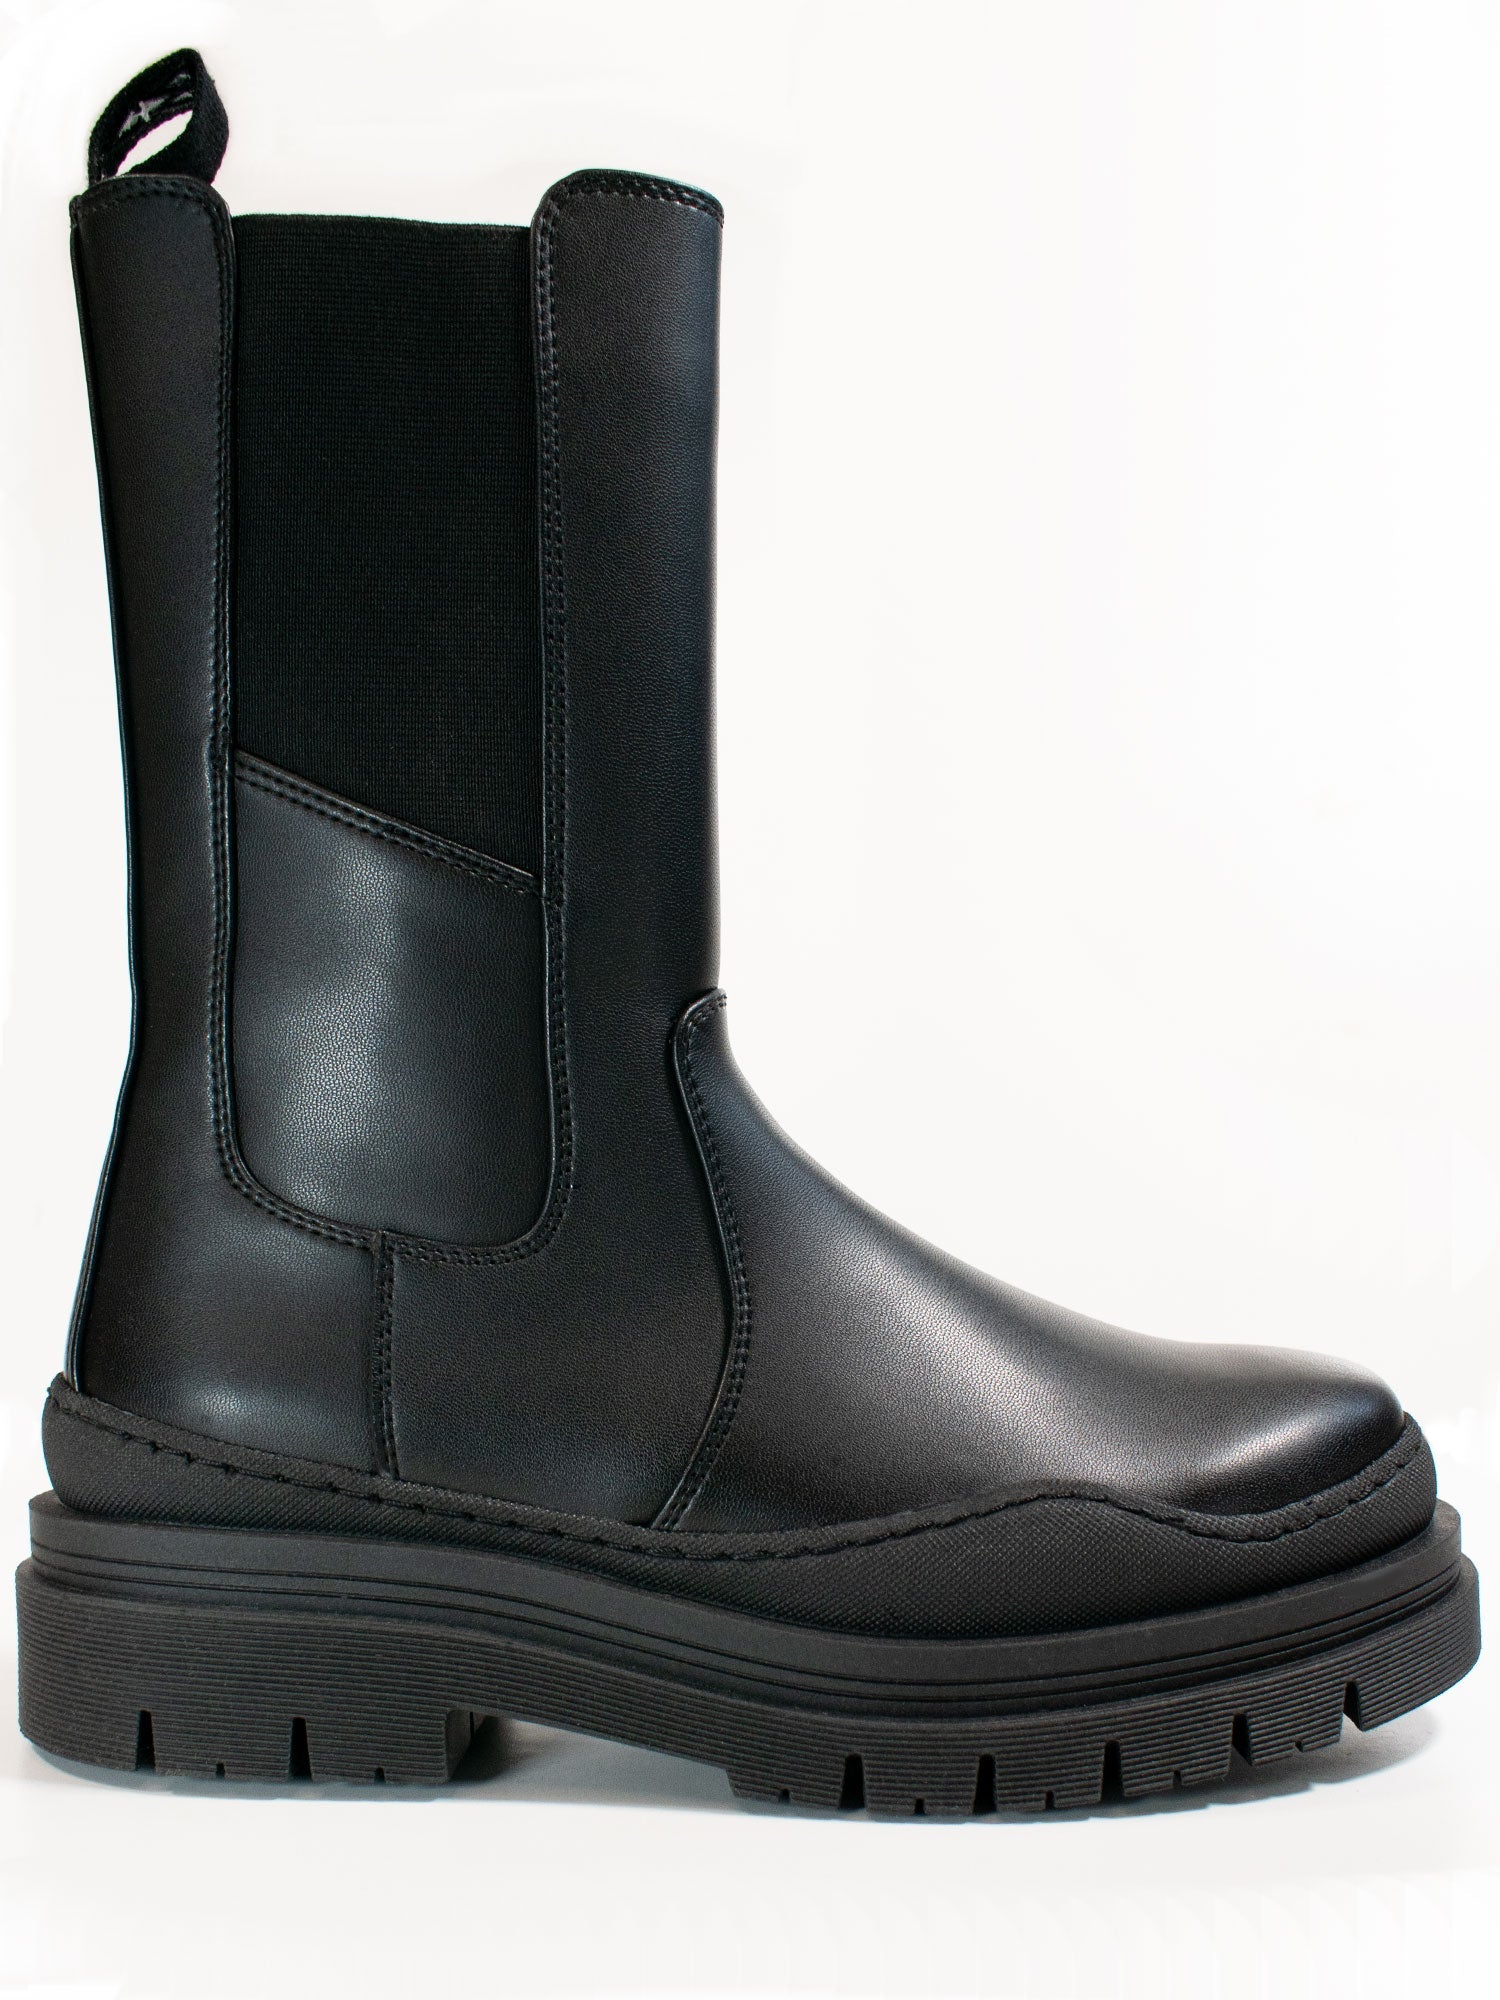 Track-Sole-Chelsea-Mid-Height-Boots-Edited-1_782fd892-ec21-49d1-b5be-e8eb125c439c.jpg